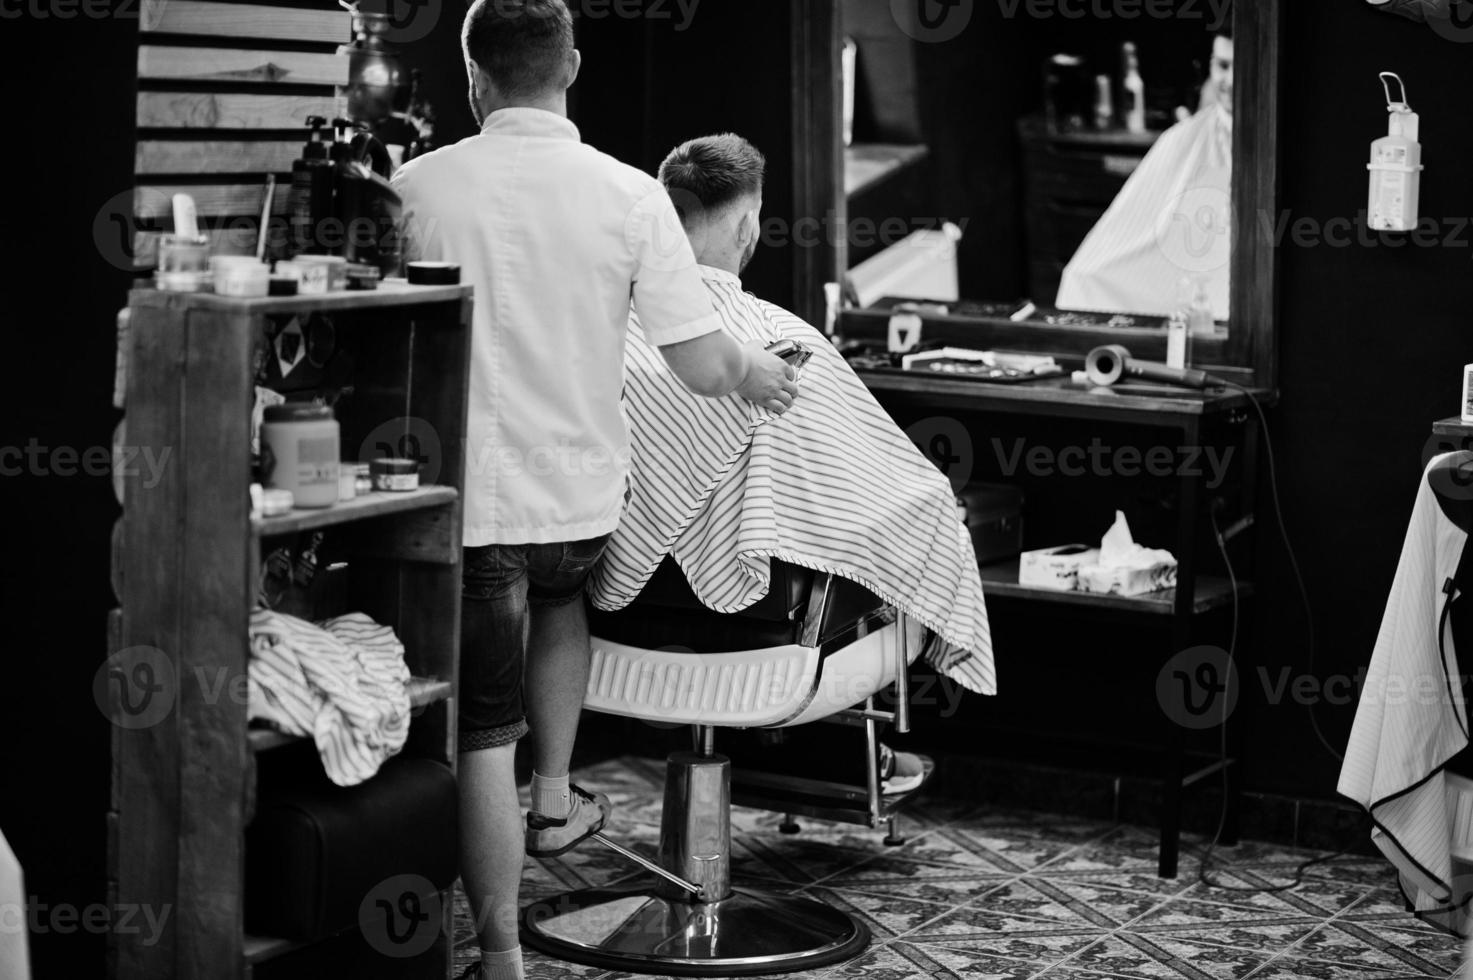 Young bearded man getting haircut by hairdresser while sitting in chair at barbershop. Barber soul. photo